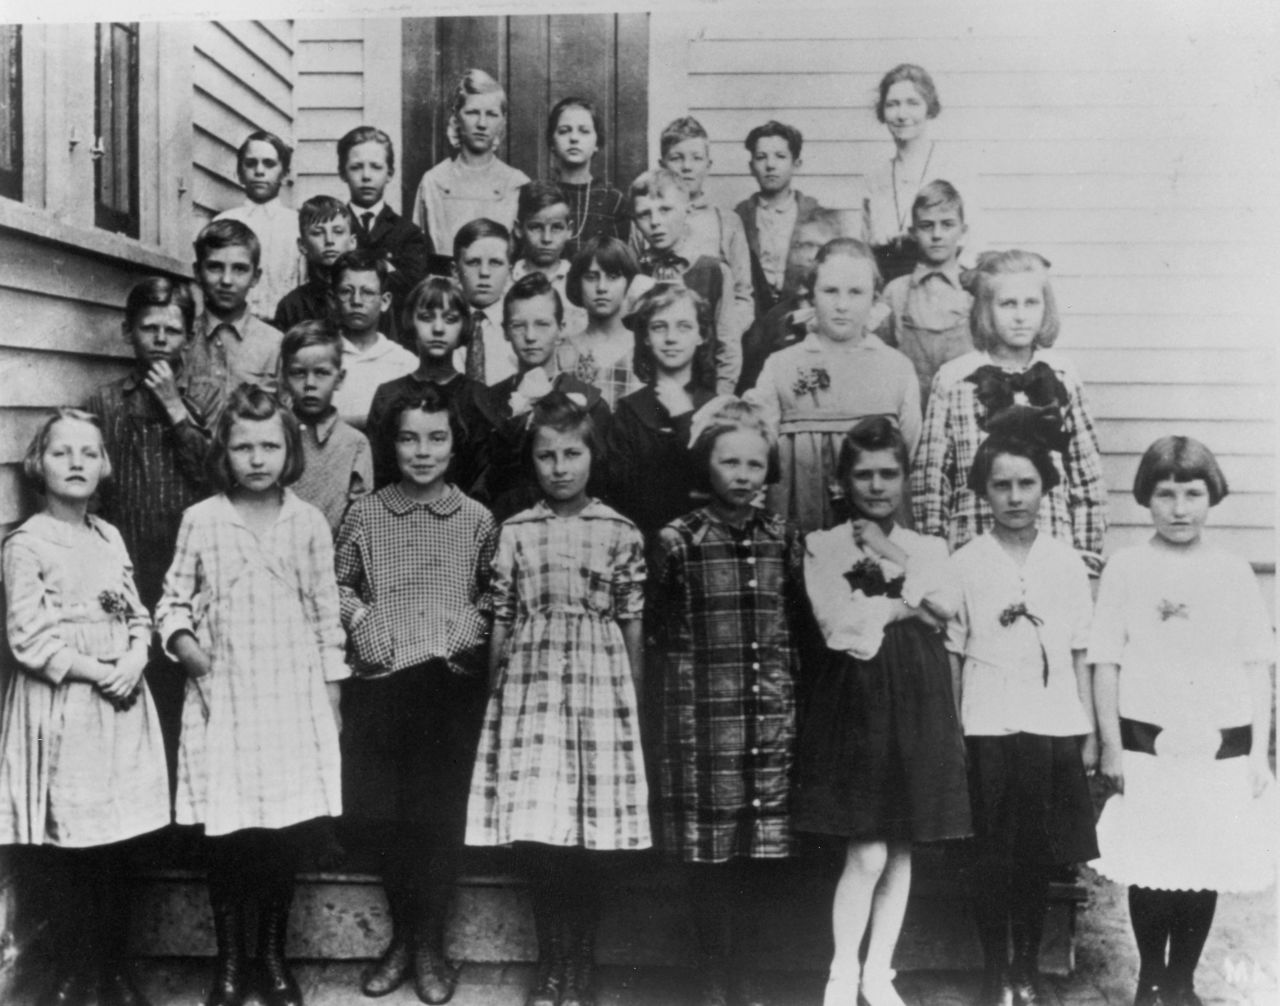 Born in 1911 in Tampico, Illinois, Reagan (second row, left) posed in this 1919 photo with his third grade classmates.  